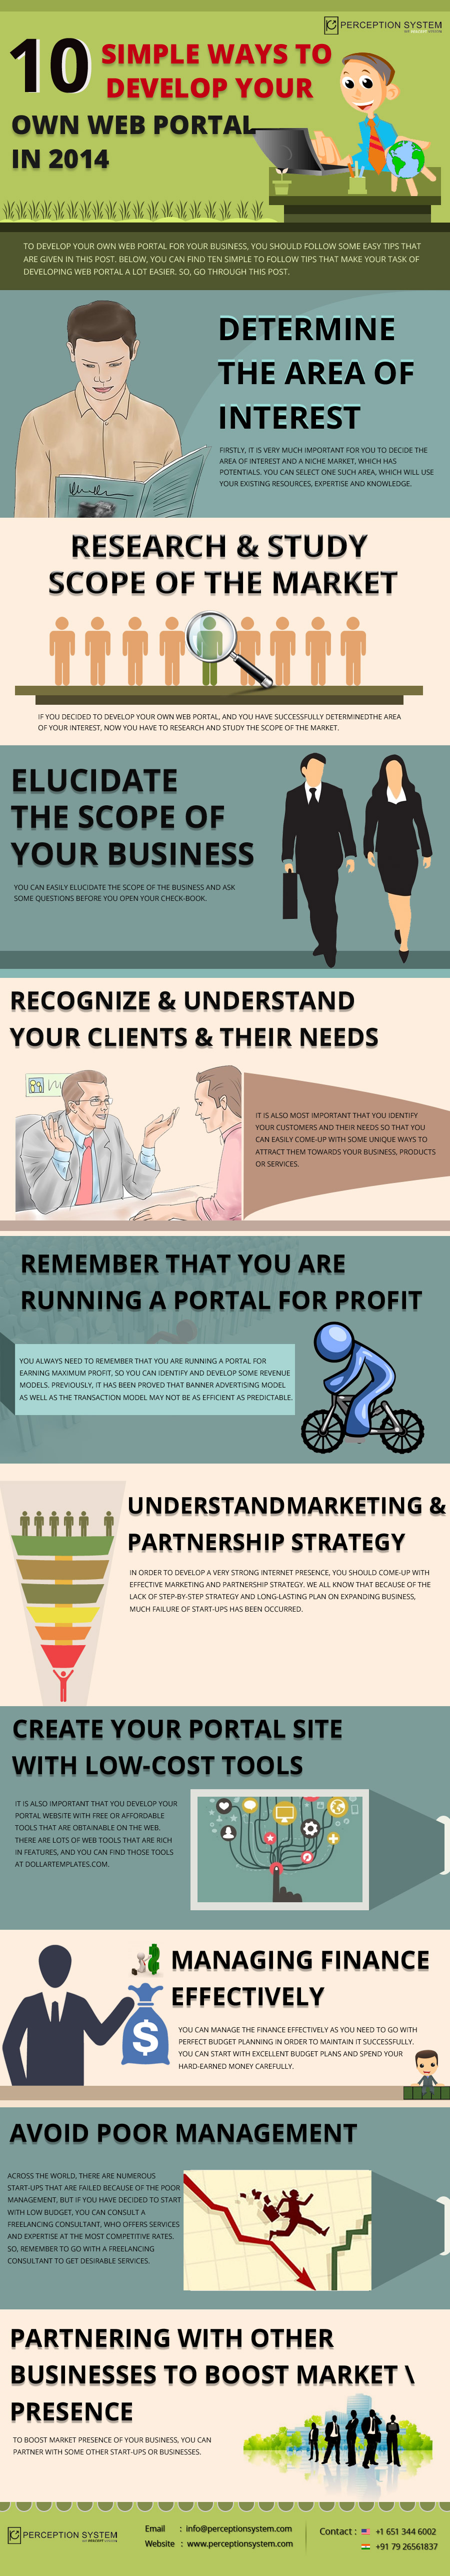 Create Your Own Infographics